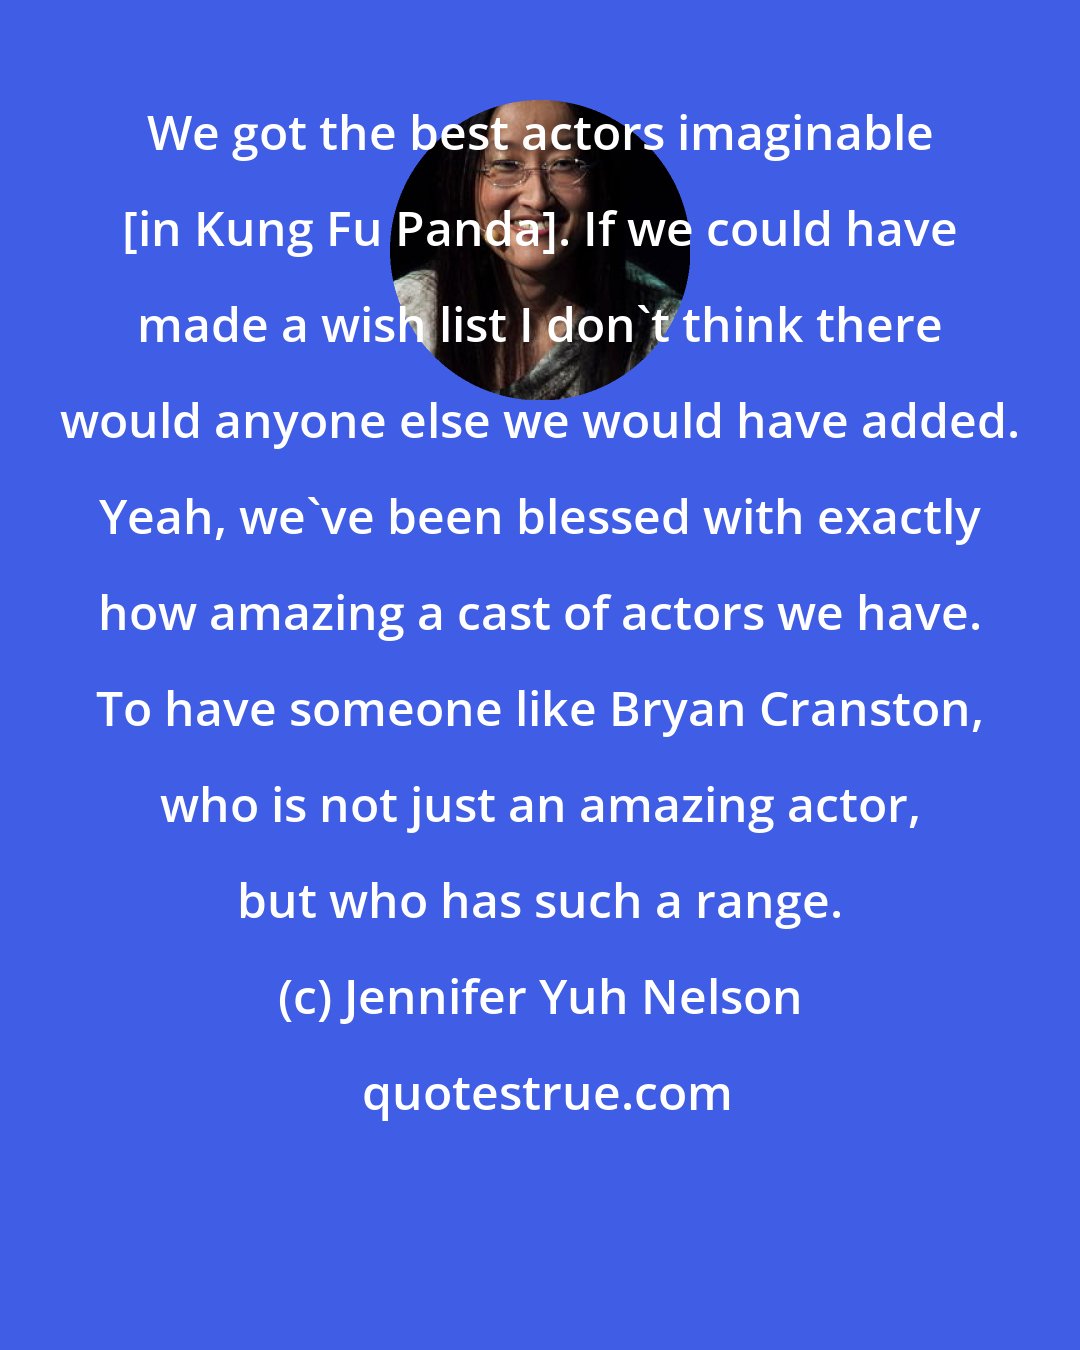 Jennifer Yuh Nelson: We got the best actors imaginable [in Kung Fu Panda]. If we could have made a wish list I don't think there would anyone else we would have added. Yeah, we've been blessed with exactly how amazing a cast of actors we have. To have someone like Bryan Cranston, who is not just an amazing actor, but who has such a range.